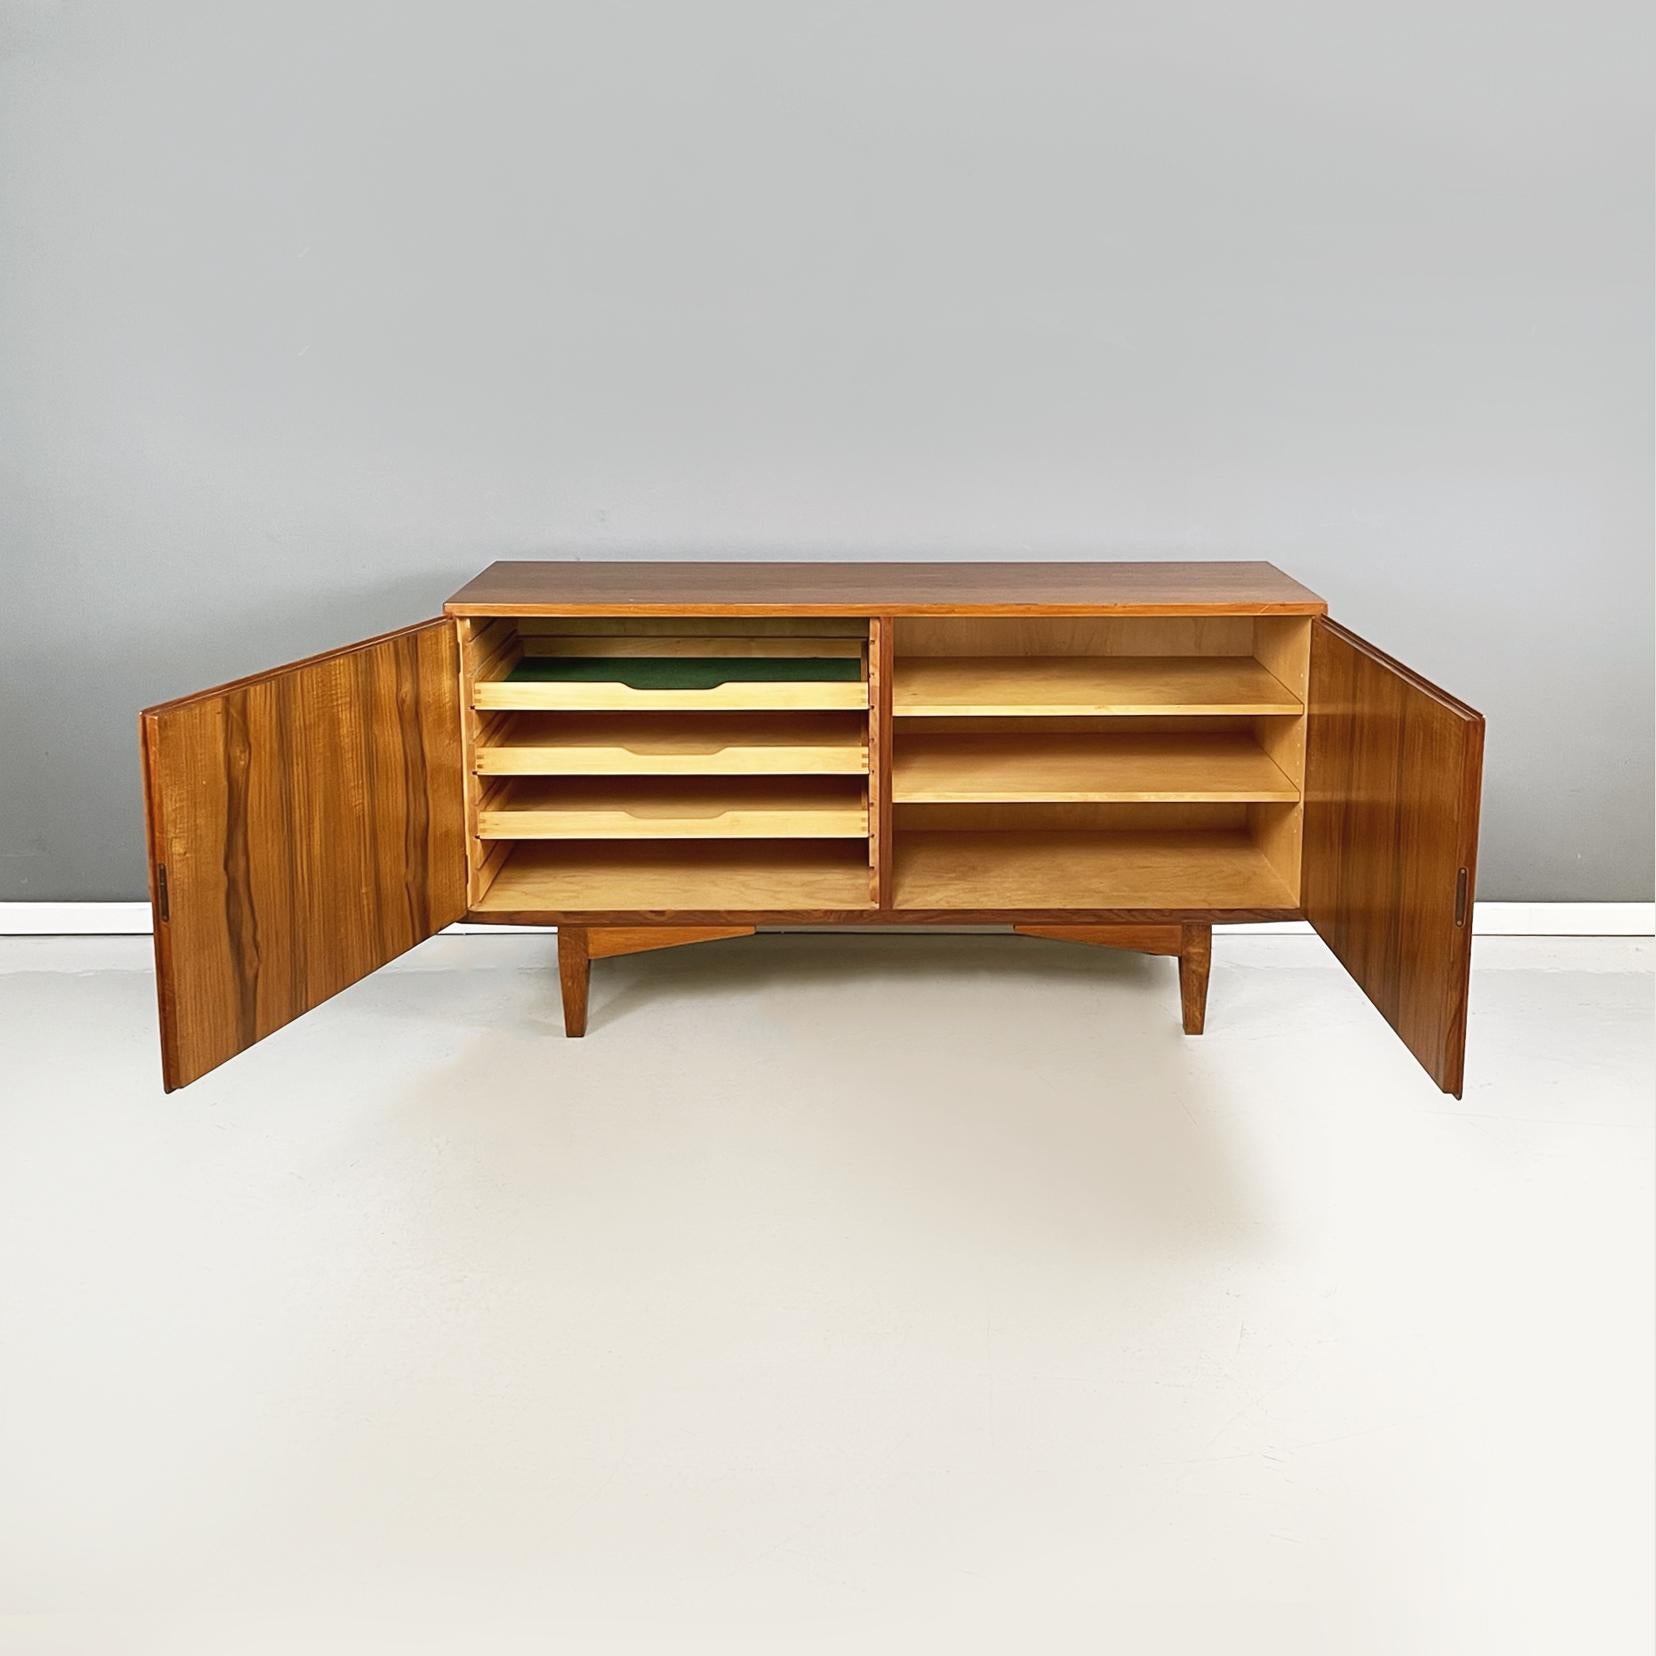 Italian midcentury Wooden sideboard with drawer and shelves, 1960s
The rectangular sideboard is in solid wood. On the front it has two hinged doors, inside on one side there are 3 drawers and on the other 2 shelves. The doors lock with a key. Legs